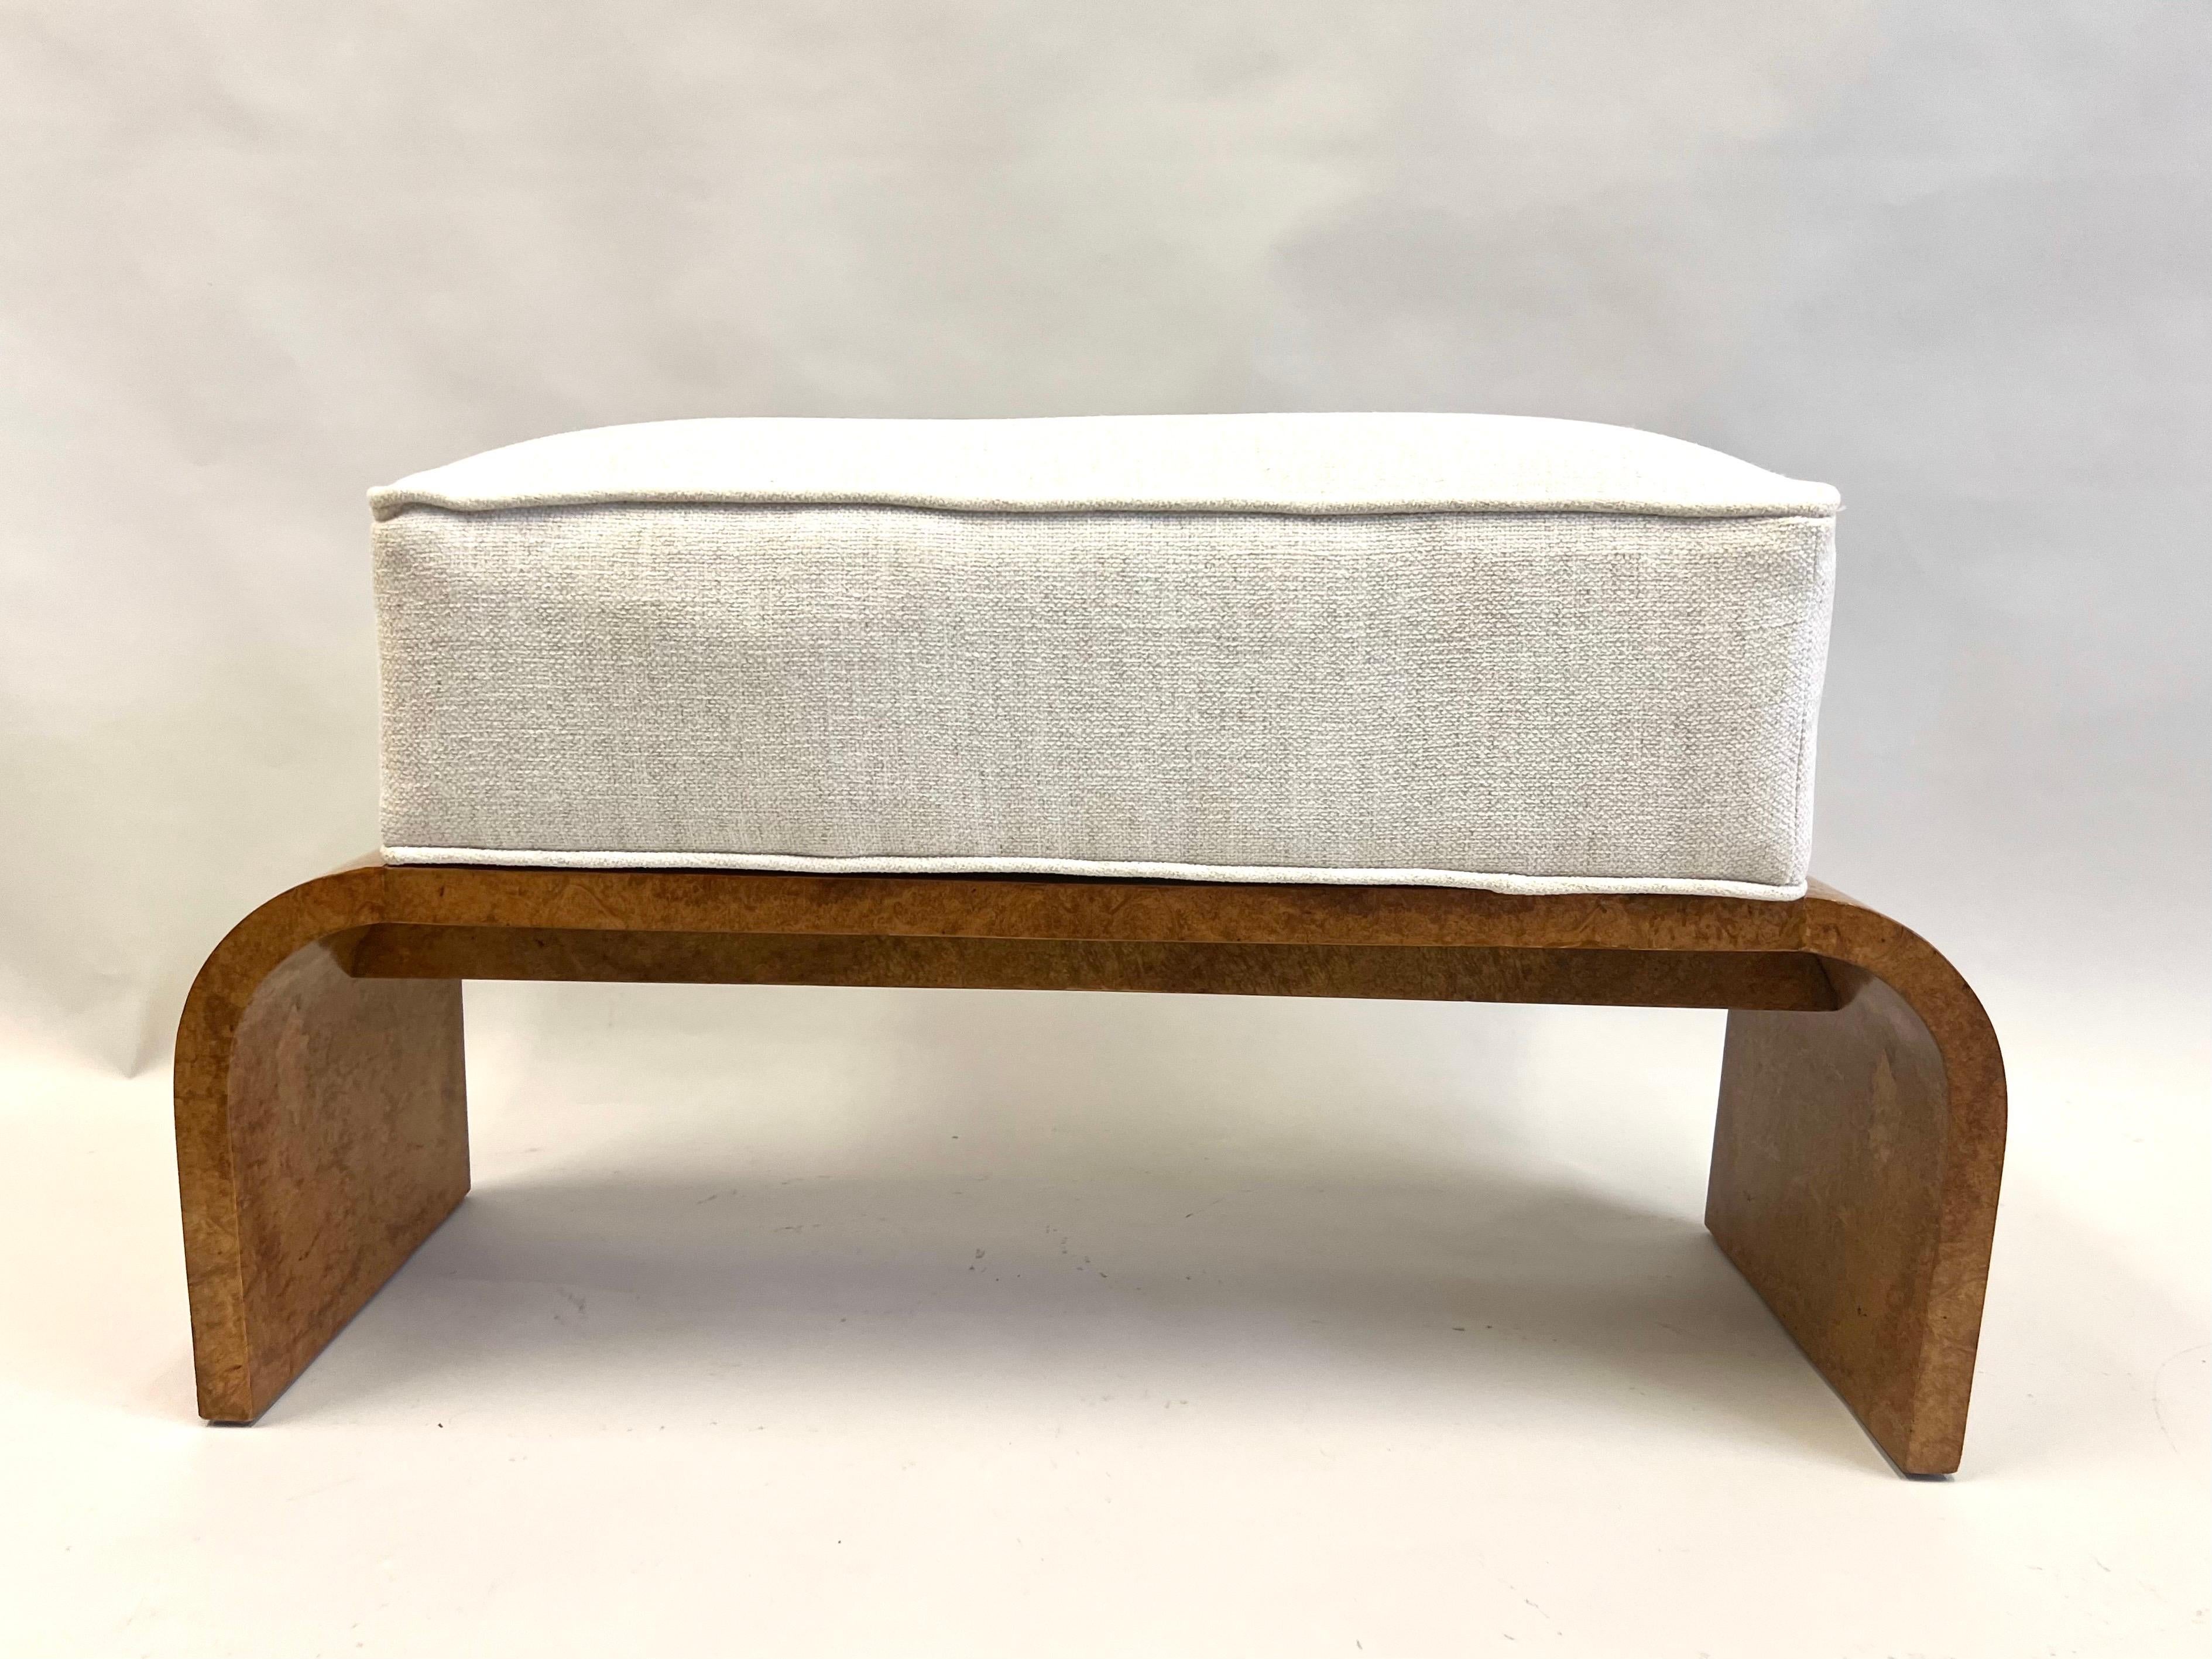 Hand-Crafted French Art Deco Burled Walnut Bench by Michel Roux-Spitz circa 1925 For Sale